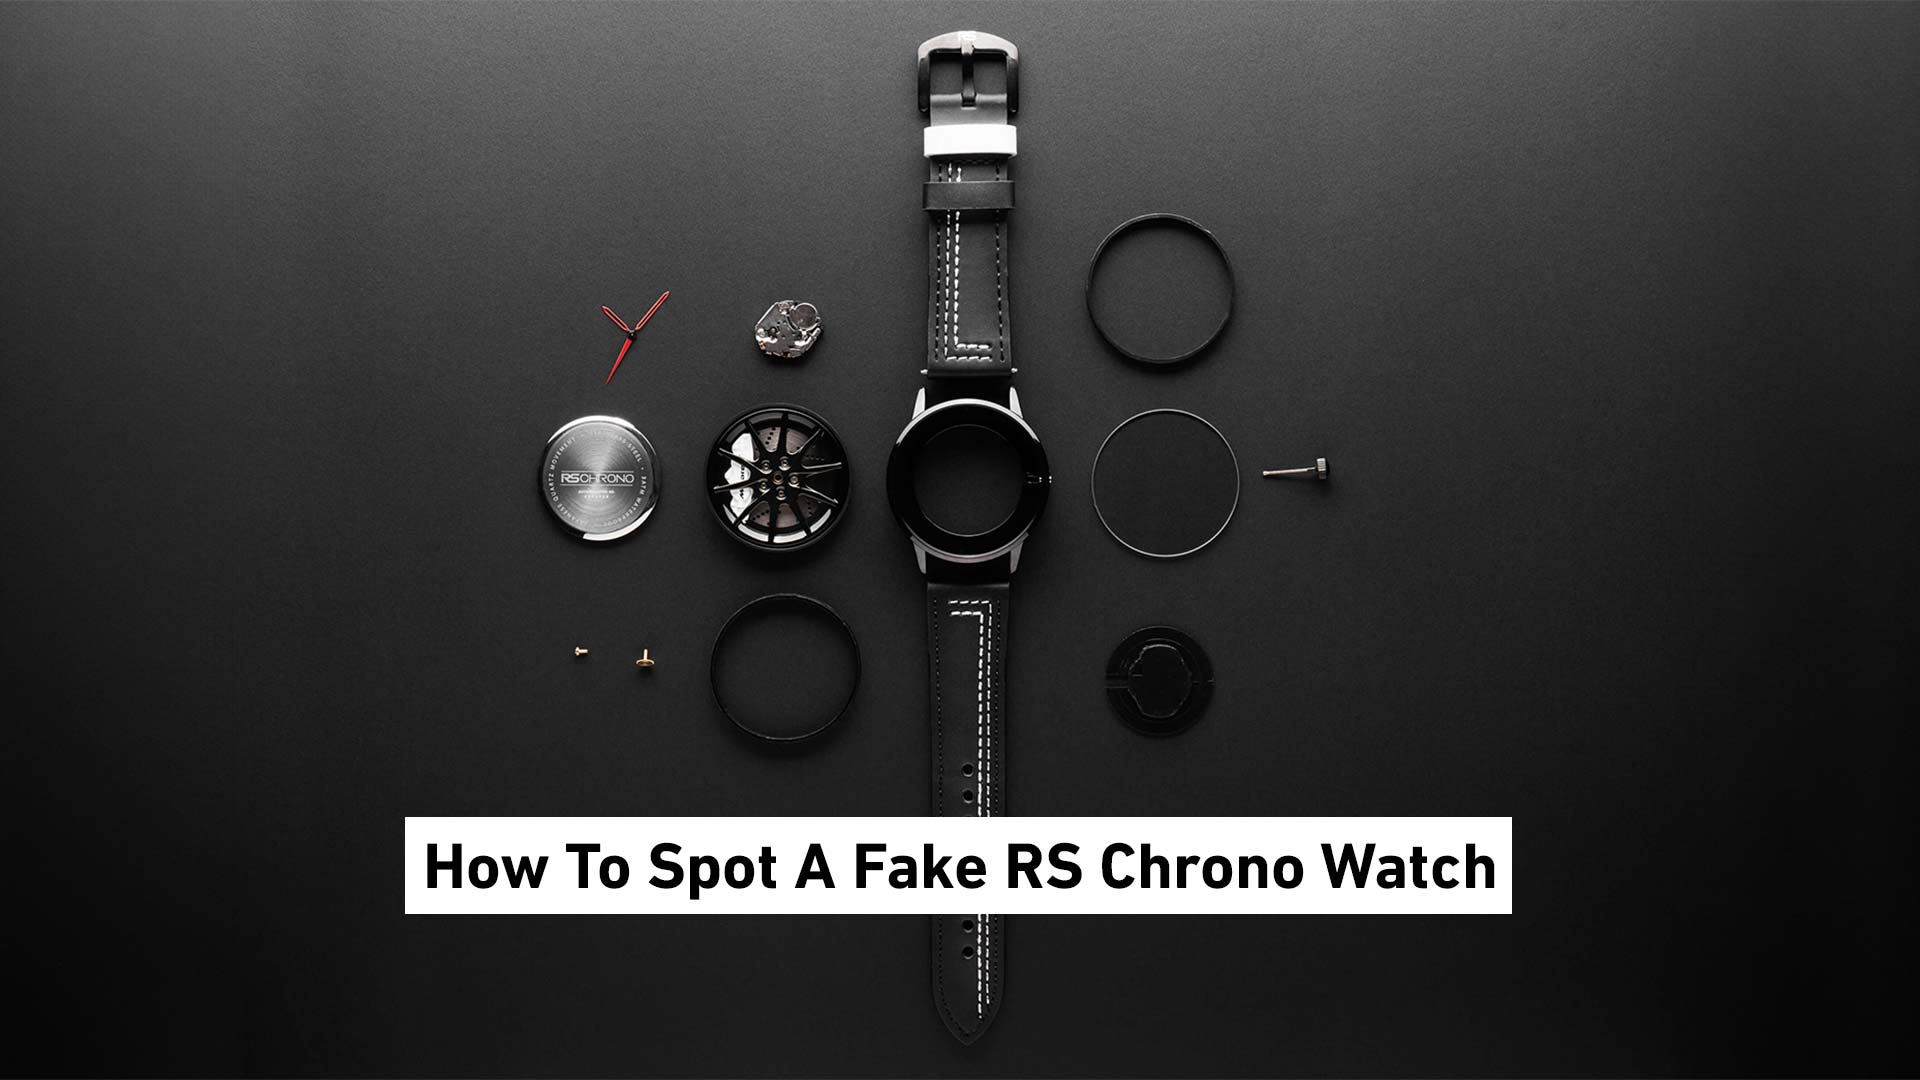 How to Spot a Fake RS Chrono Watch